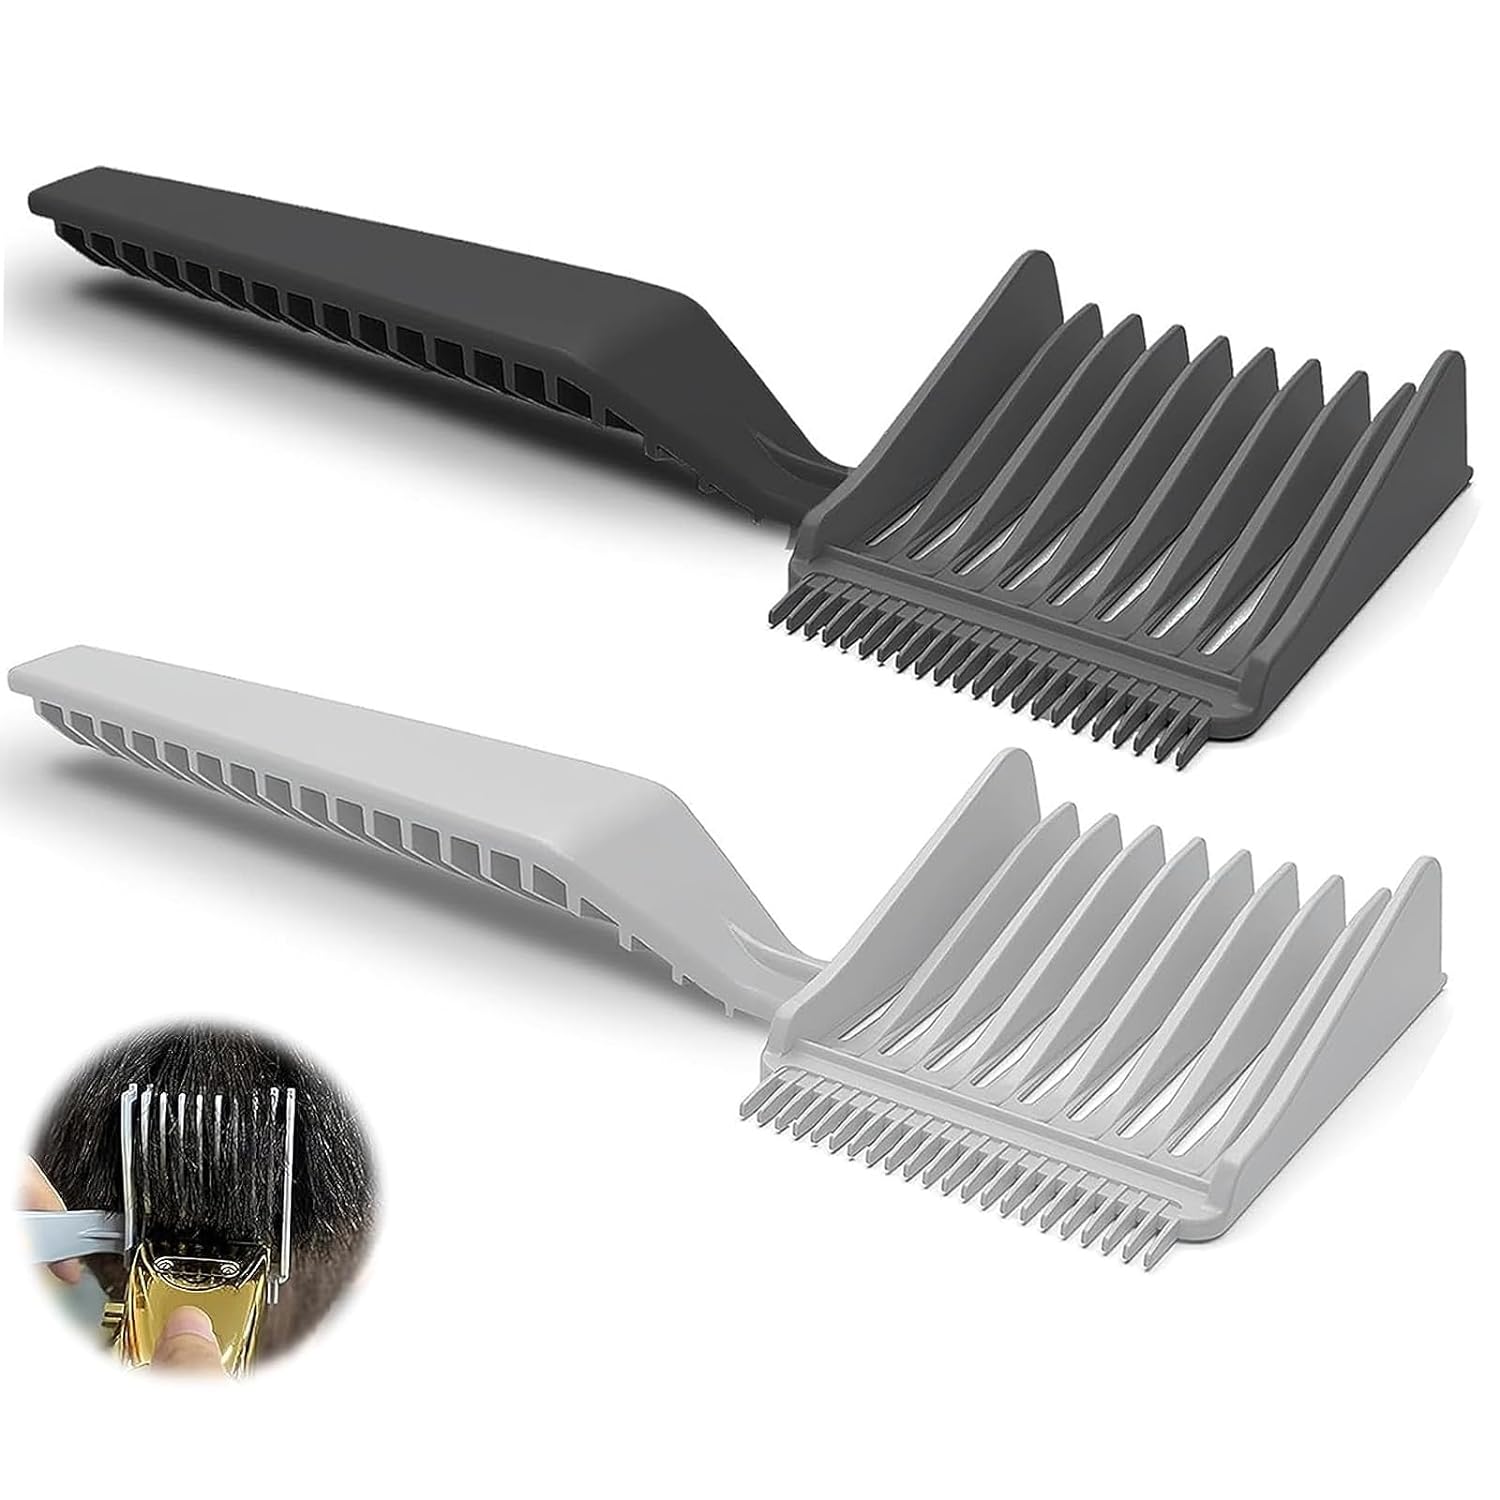 Barber Comb for Men, Barber Fade Combs, Professional Curved Positioning Comb, Specially for Men\'s Hairstyle, Beard Styling, and Developed Sideburns (Grey + Black)